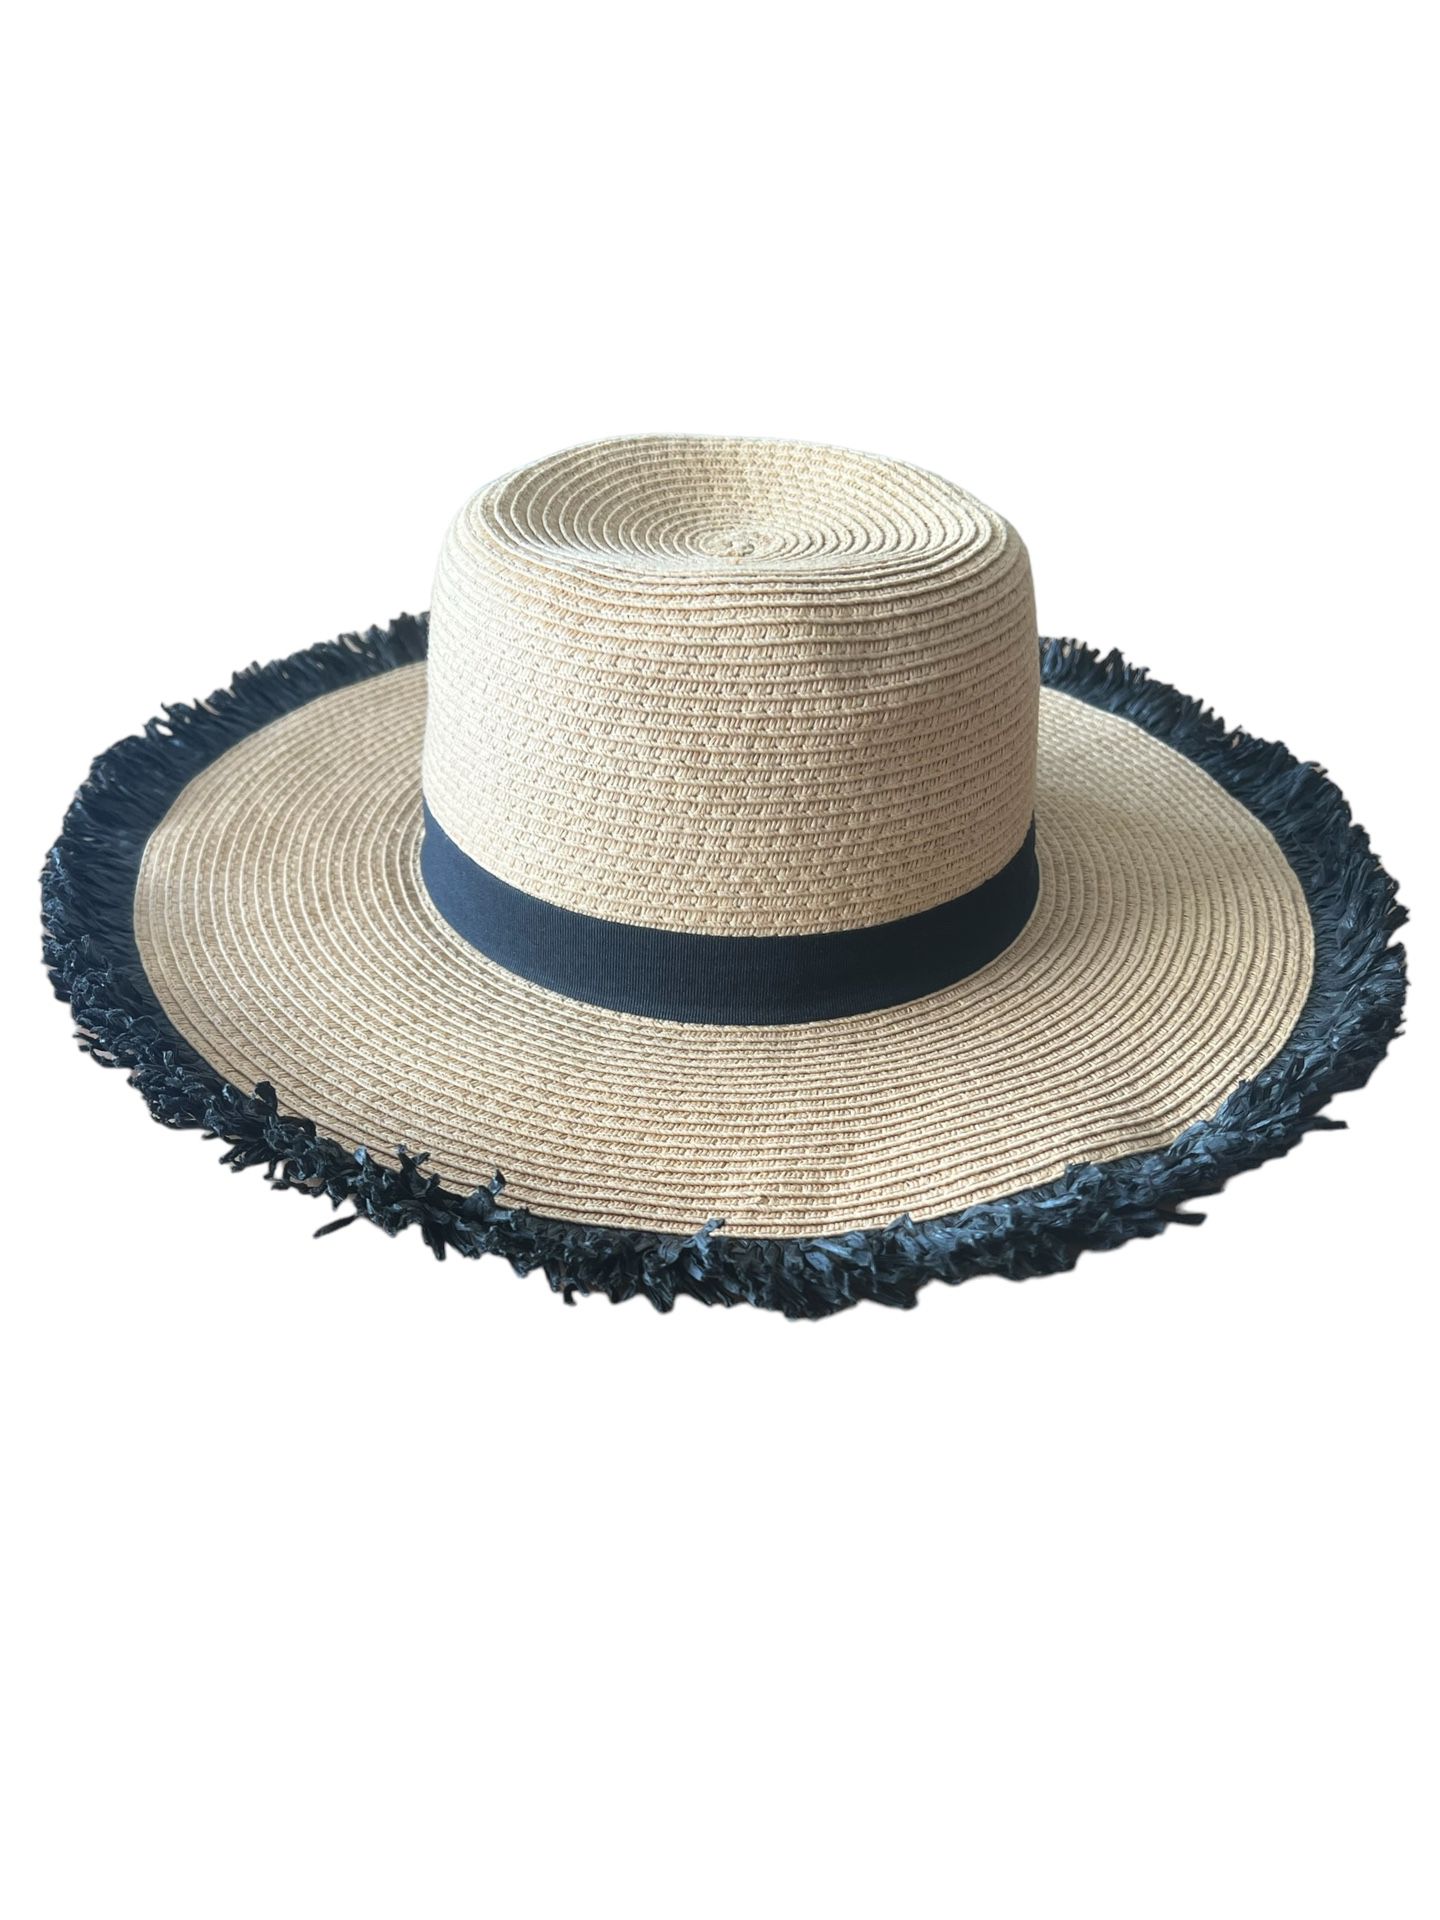 Sun-flower Black and Beige Floppy Straw Hat *Black fringe throughout the rim.  This beautiful straw hat is perfect for any occasion. The black and bei